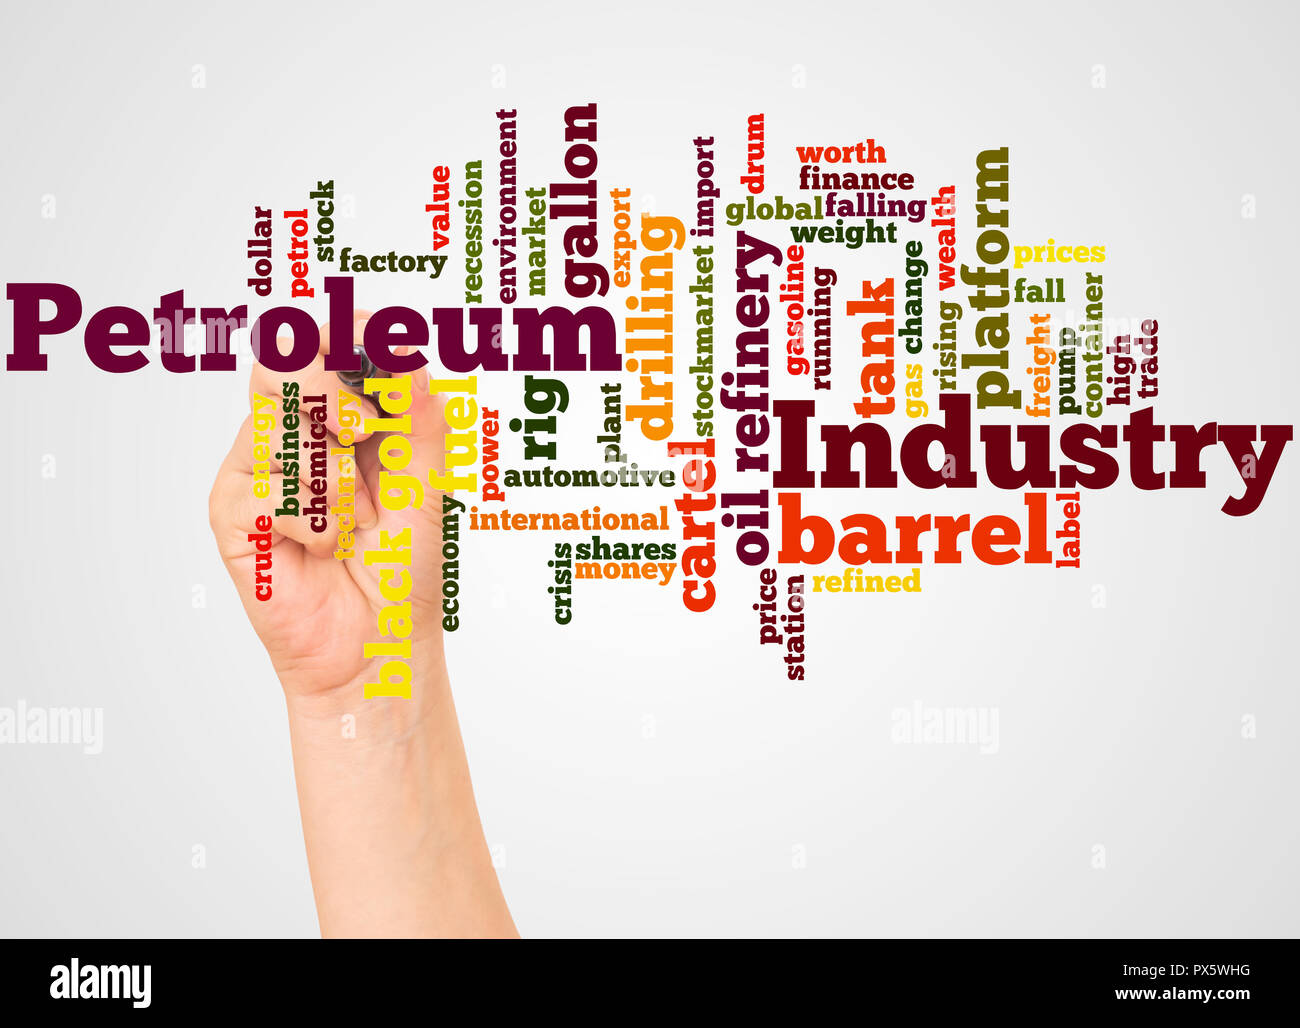 Petroleum Industry word cloud and hand with marker concept on white background. Stock Photo